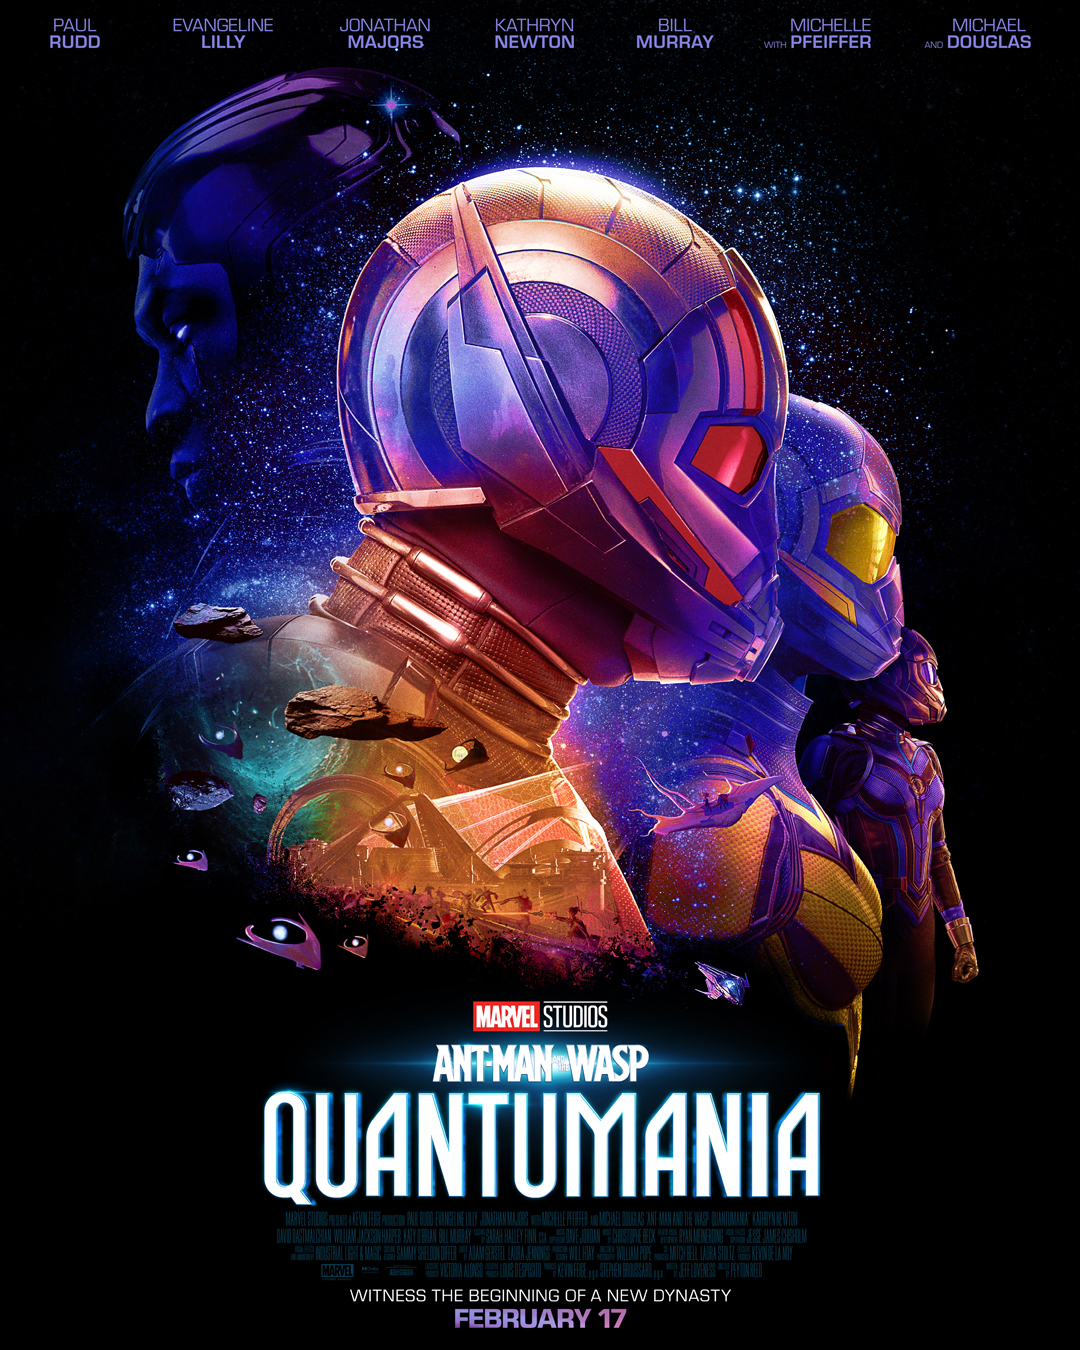 Ant-Man and the Wasp: Quantumania - Marvel Cinematic Universe